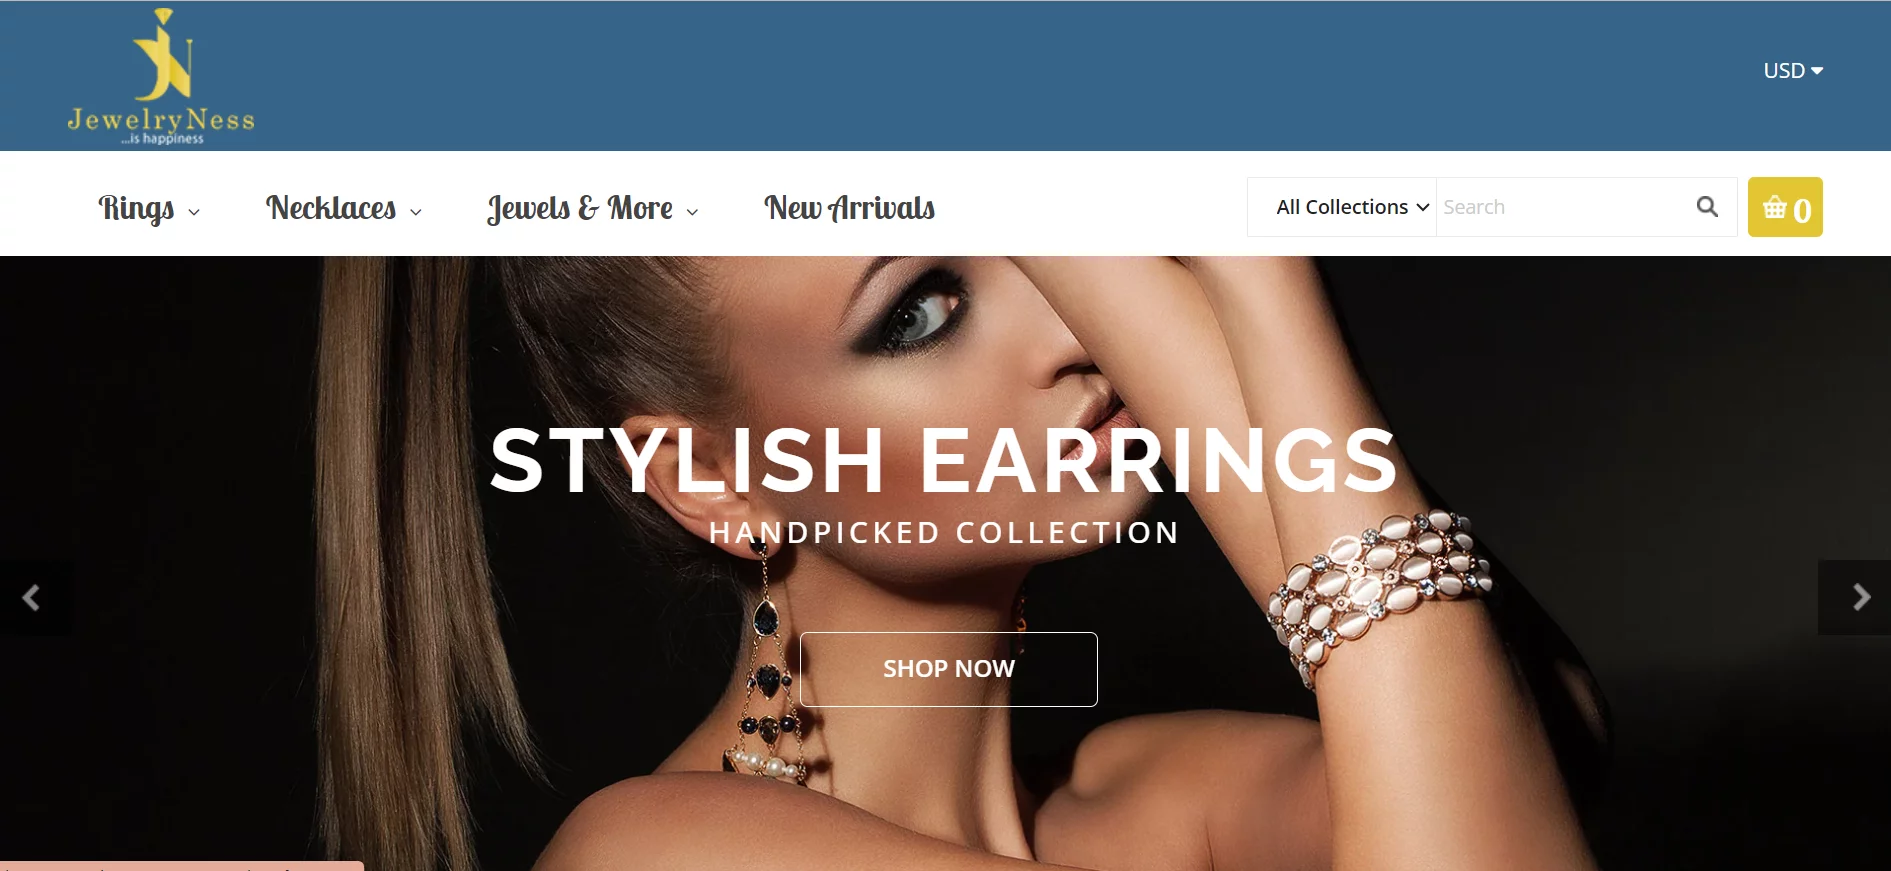 Where To Get Your Own Premade Shopify Jewelry Store?